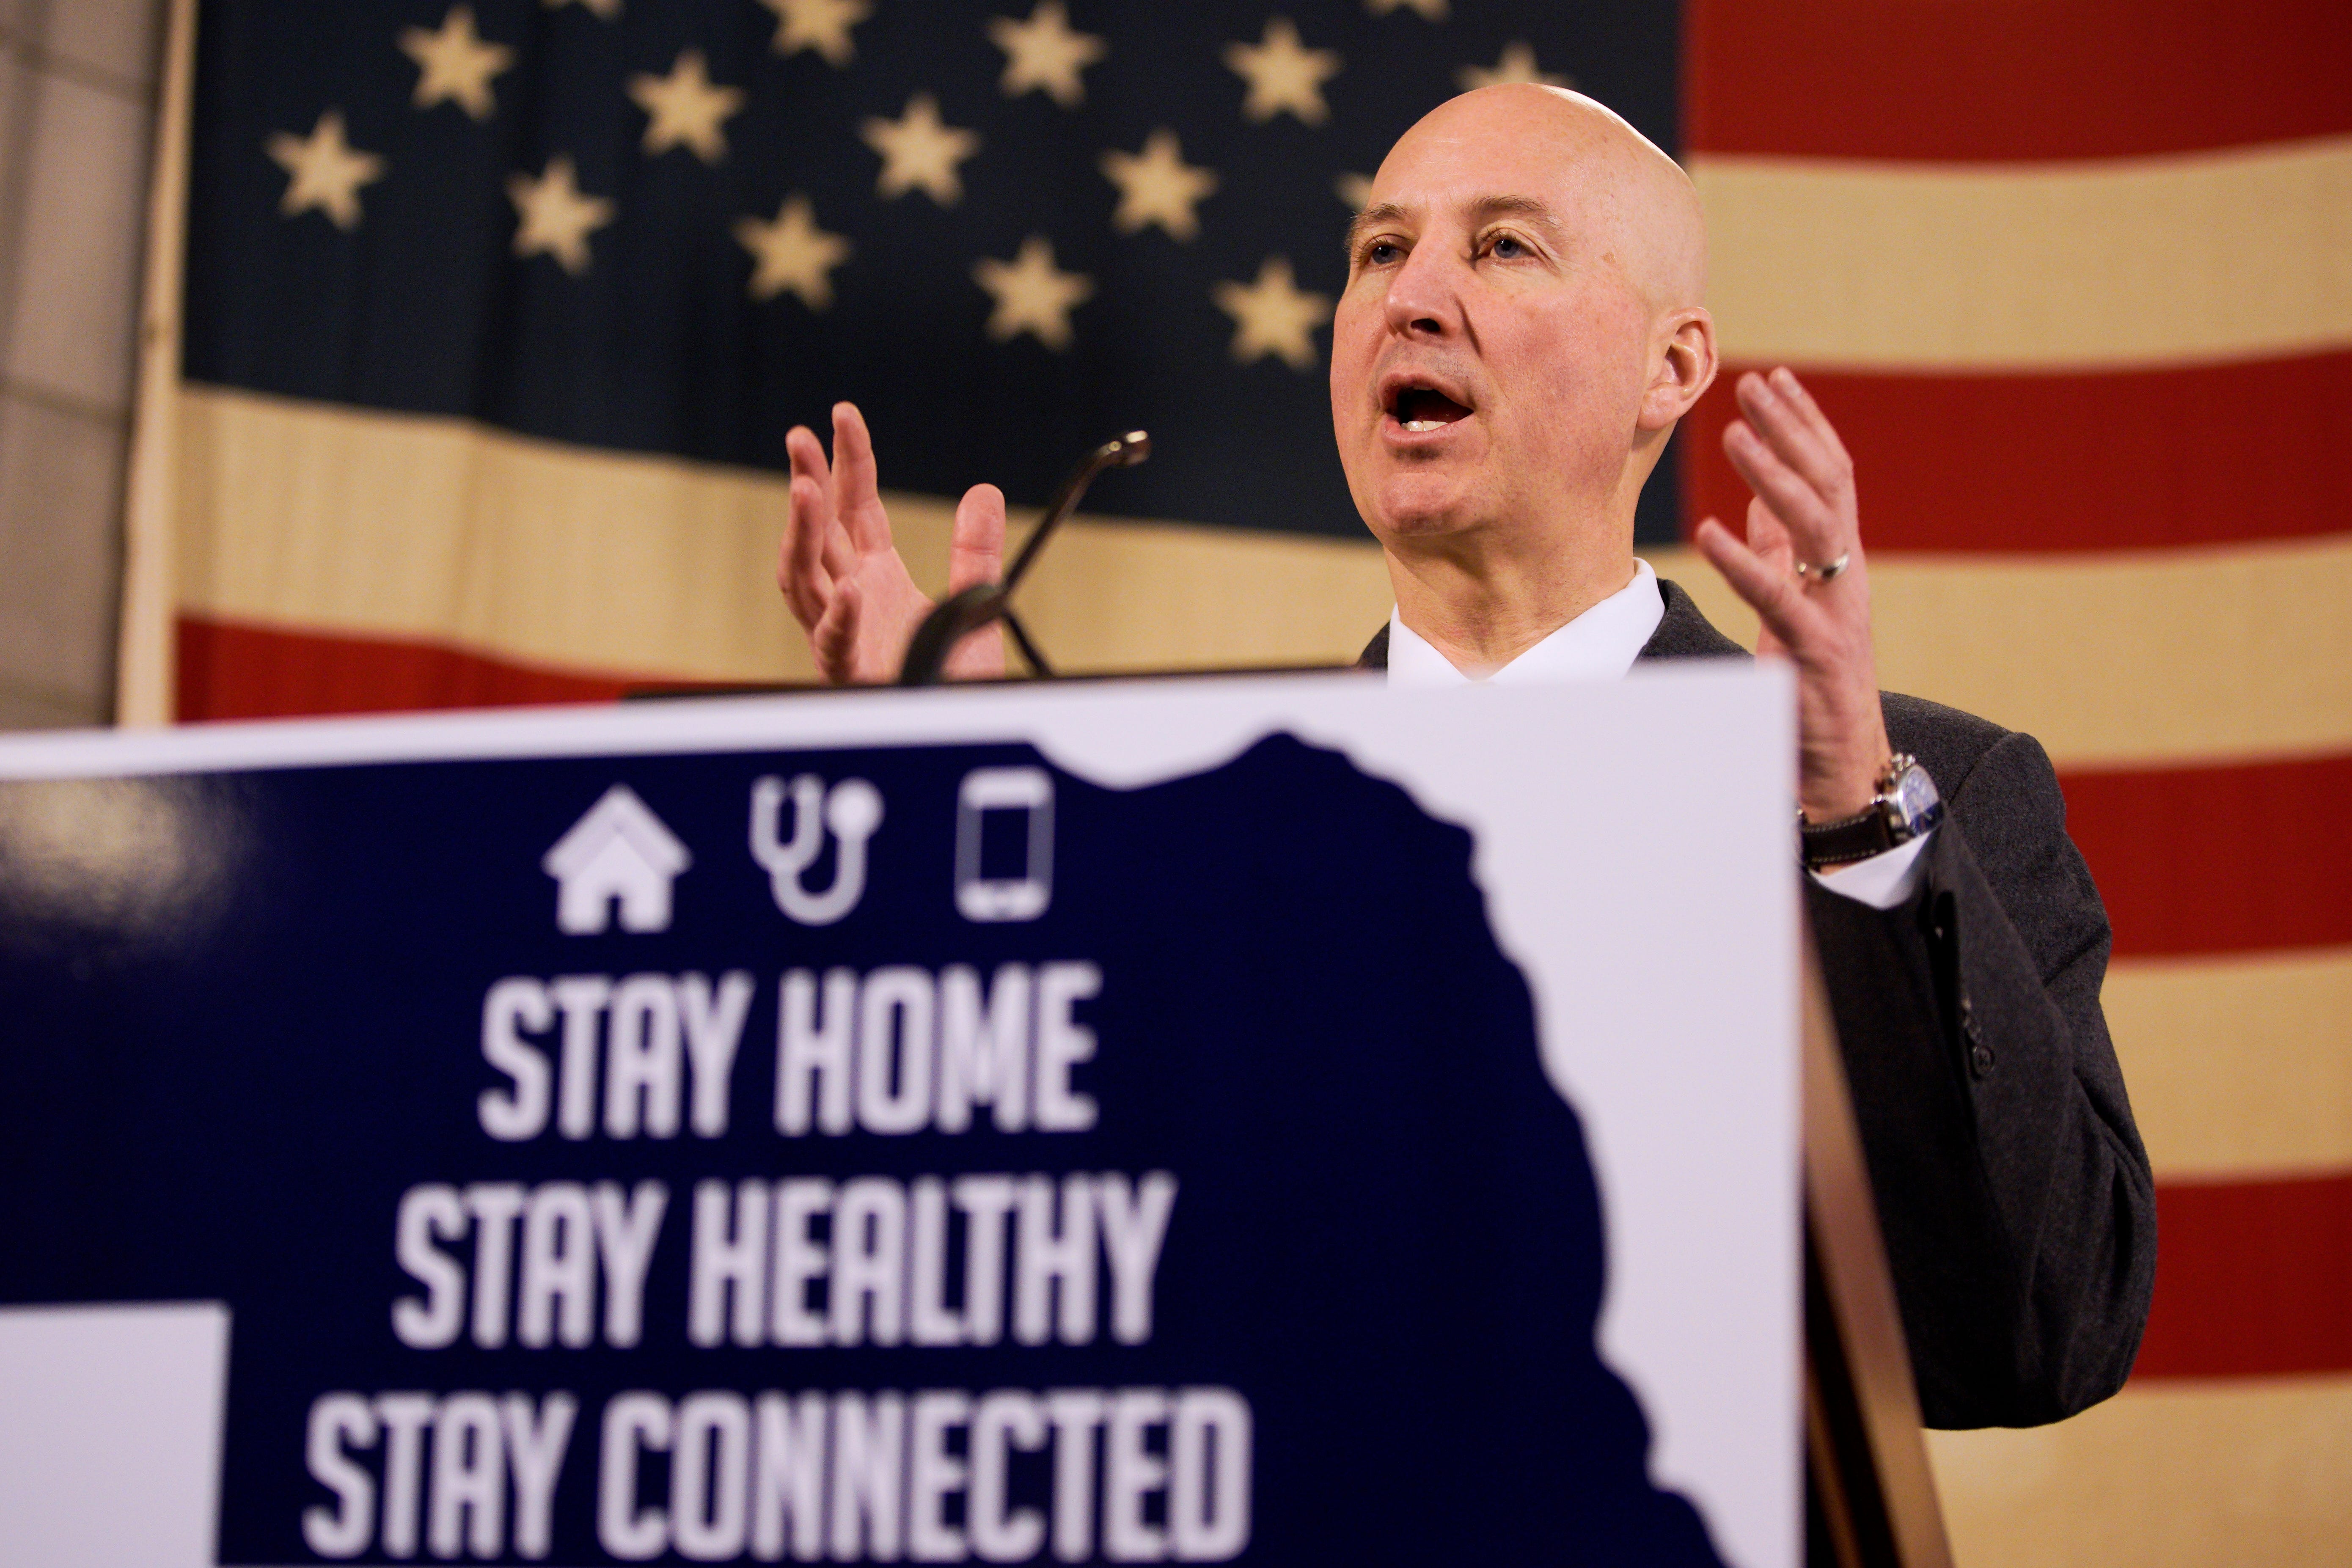 Nebraska Gov. Pete Ricketts, a Republican, speaks during a news conference about developments in the fight against COVID-19 in Lincoln on April 10, 2020.